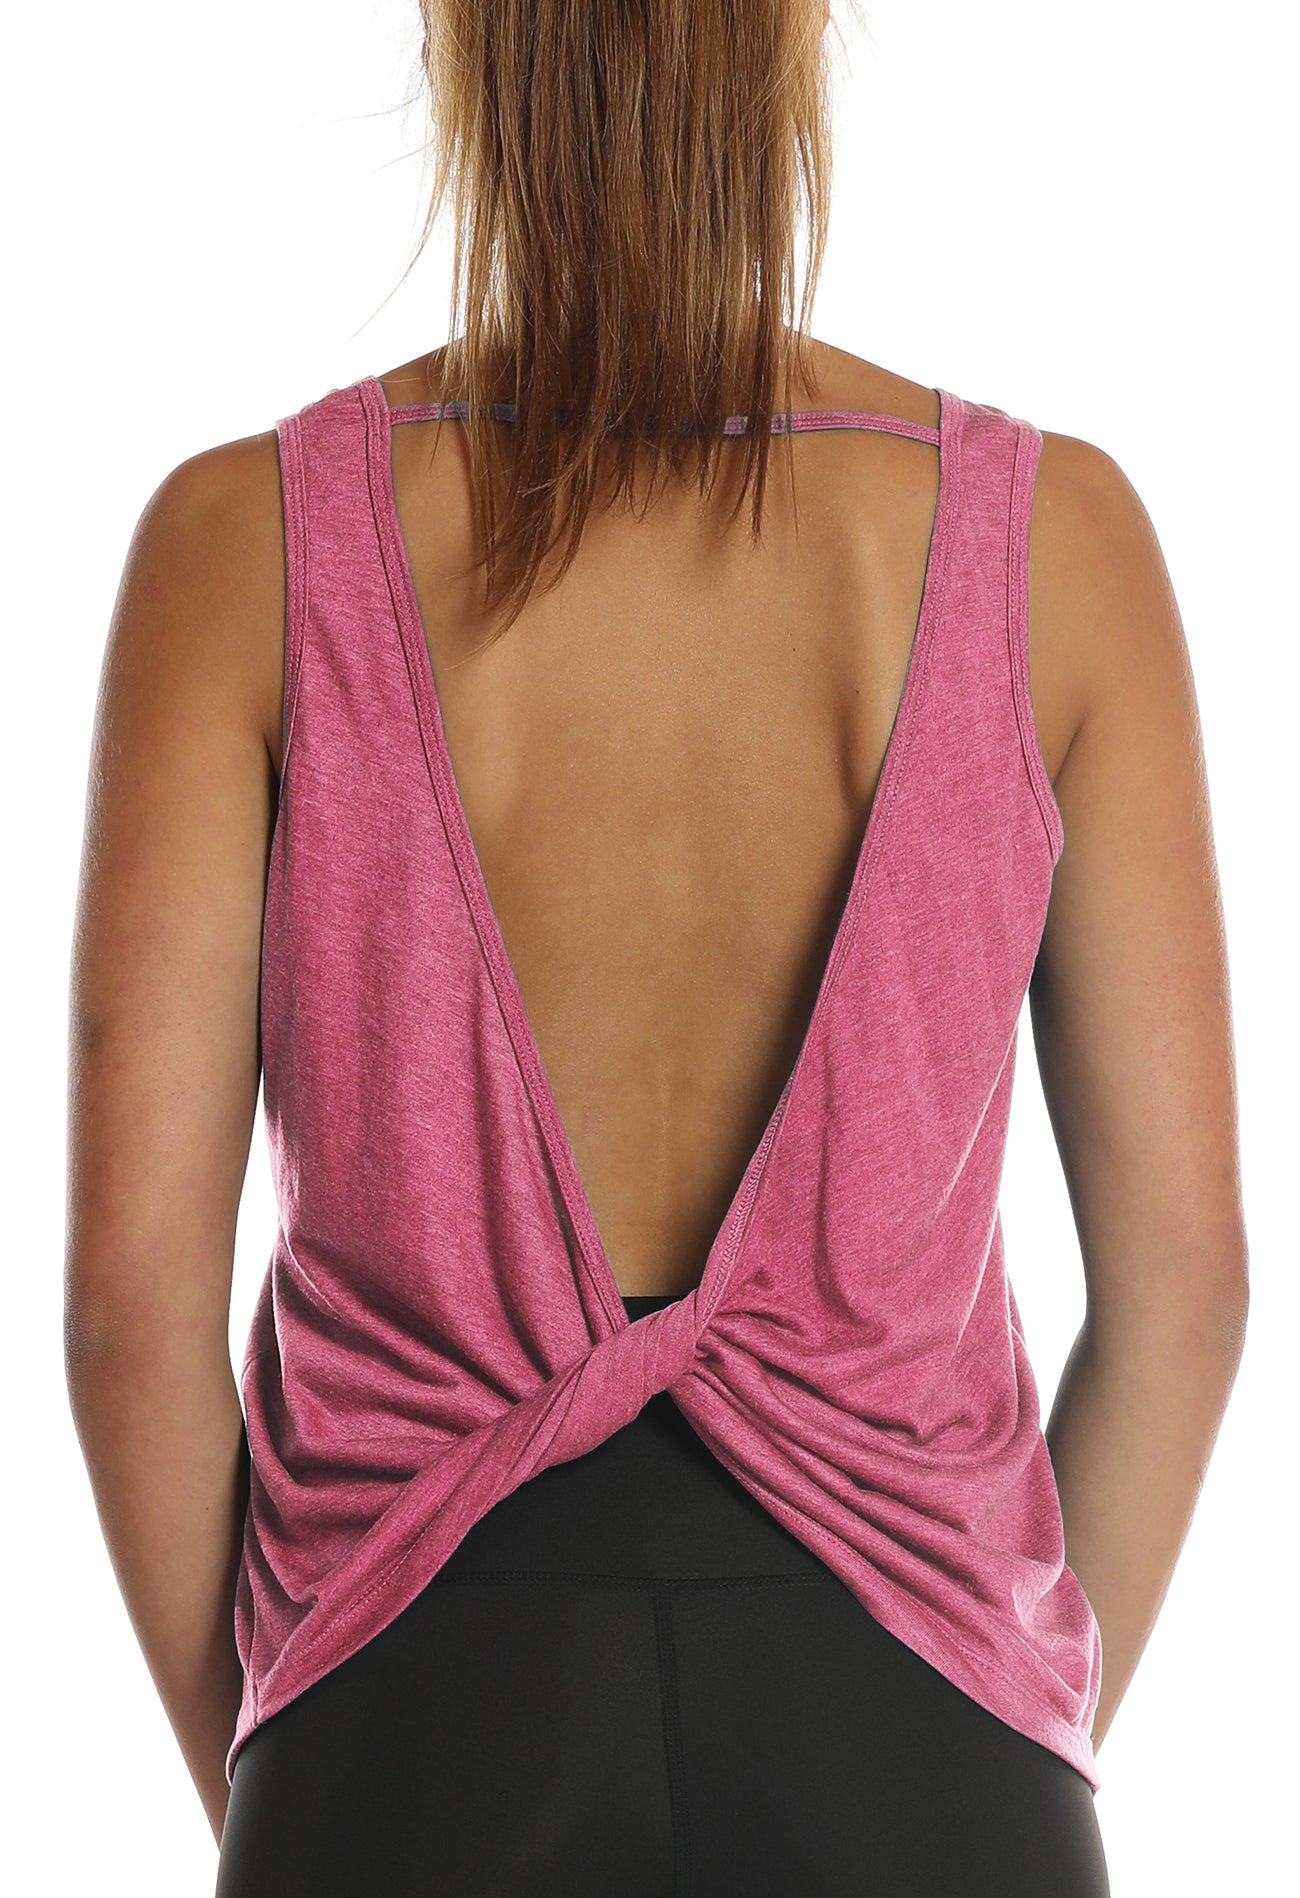 TK26 icyzone Workout Tank Tops for Women - Open Back Strappy